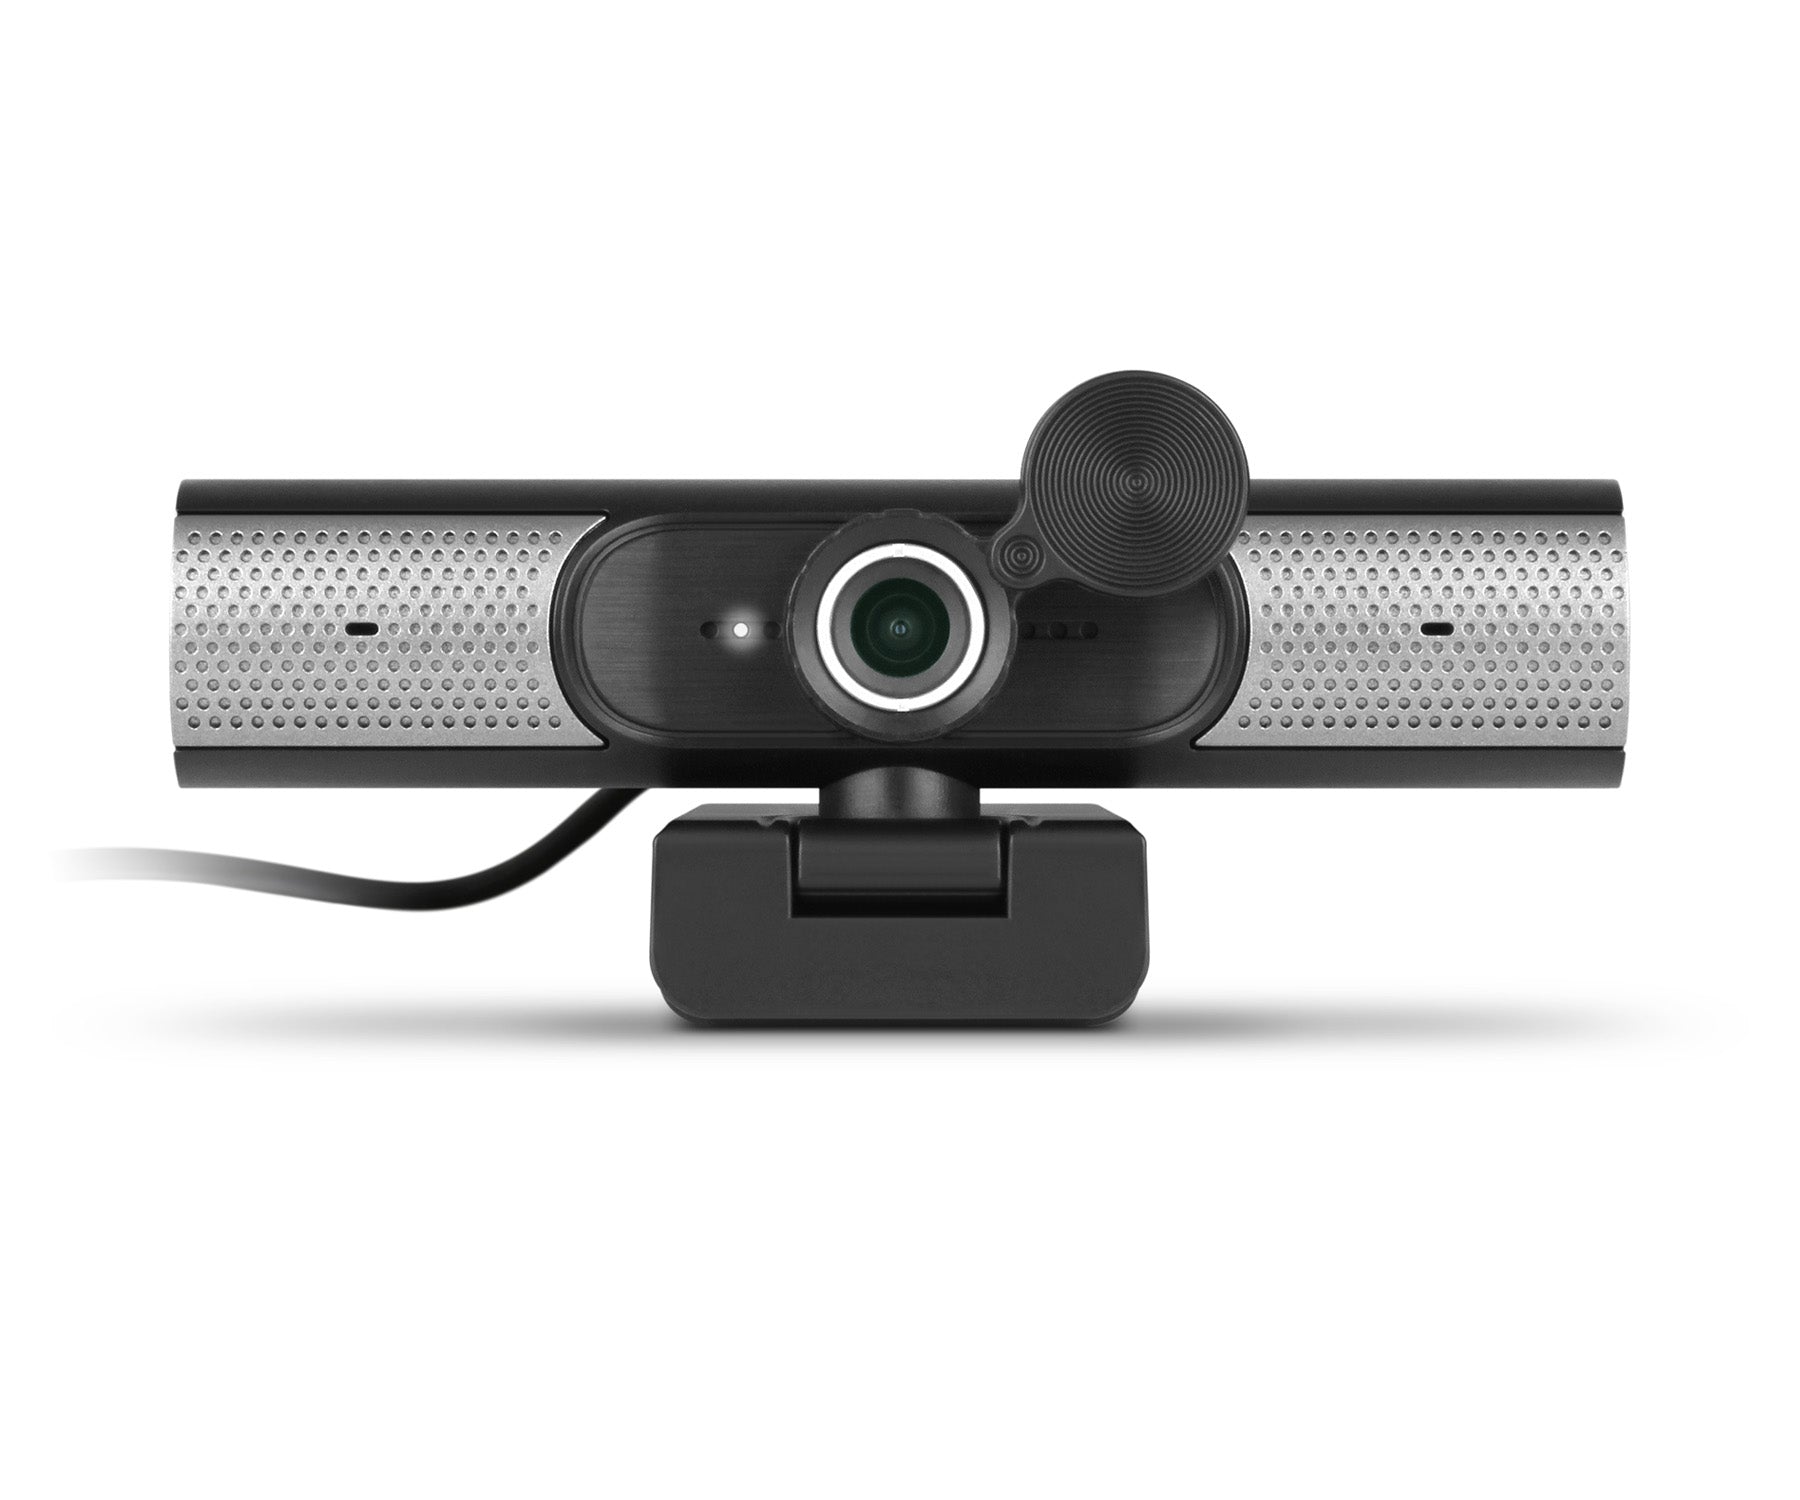 1080P HD Webcam Sri Lanka + Built-in Microphone USB Web Camera - Skyray  Electronics And Gadgets Store